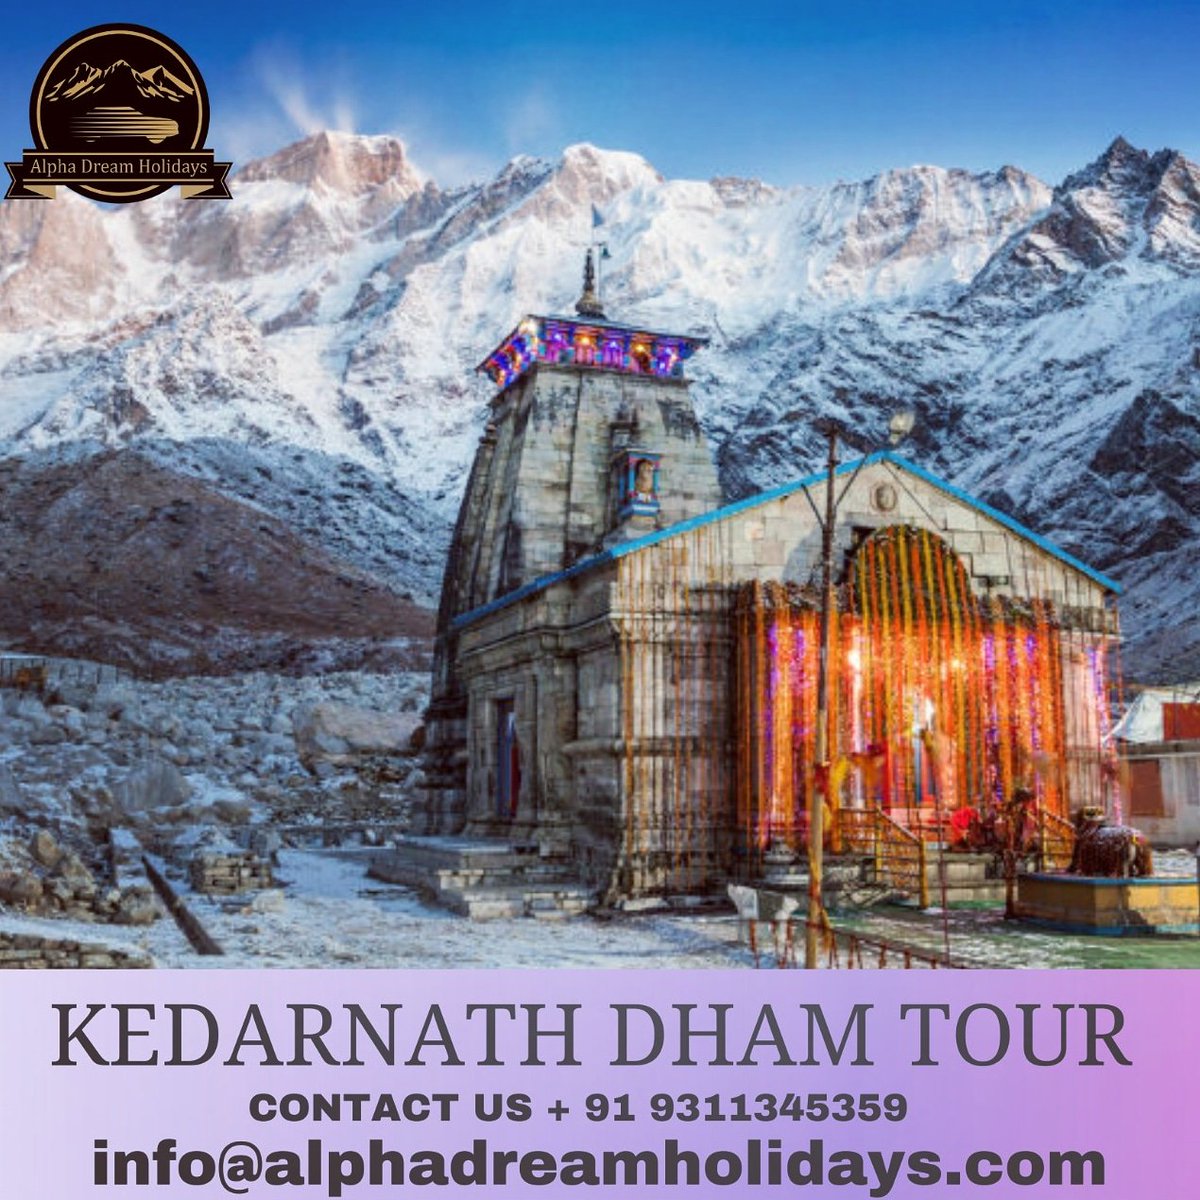 Visit the home of Lord Shiva and attain his blessings to magnet peace, harmony and happiness into your life. Book your Kedarnath  package now!
#kedarnath #badrinath #kedarnathbadrinath #haridwar #shivji #uthrakhand